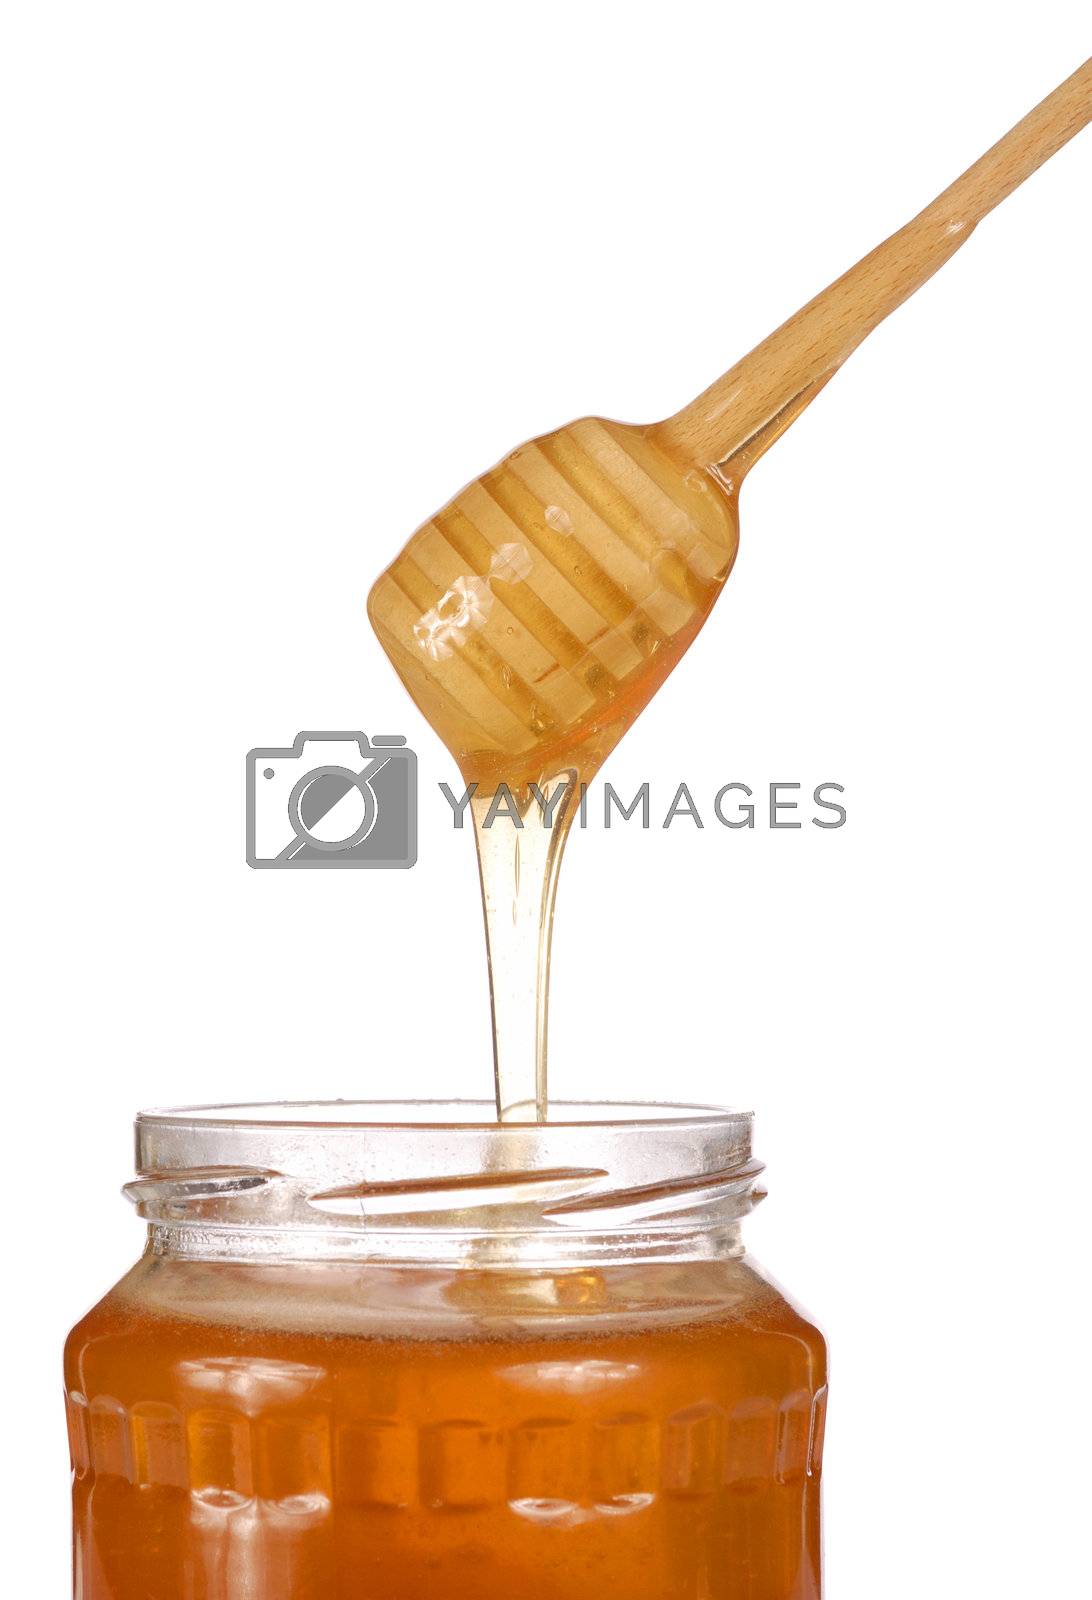 Royalty free image of Honey by ajt